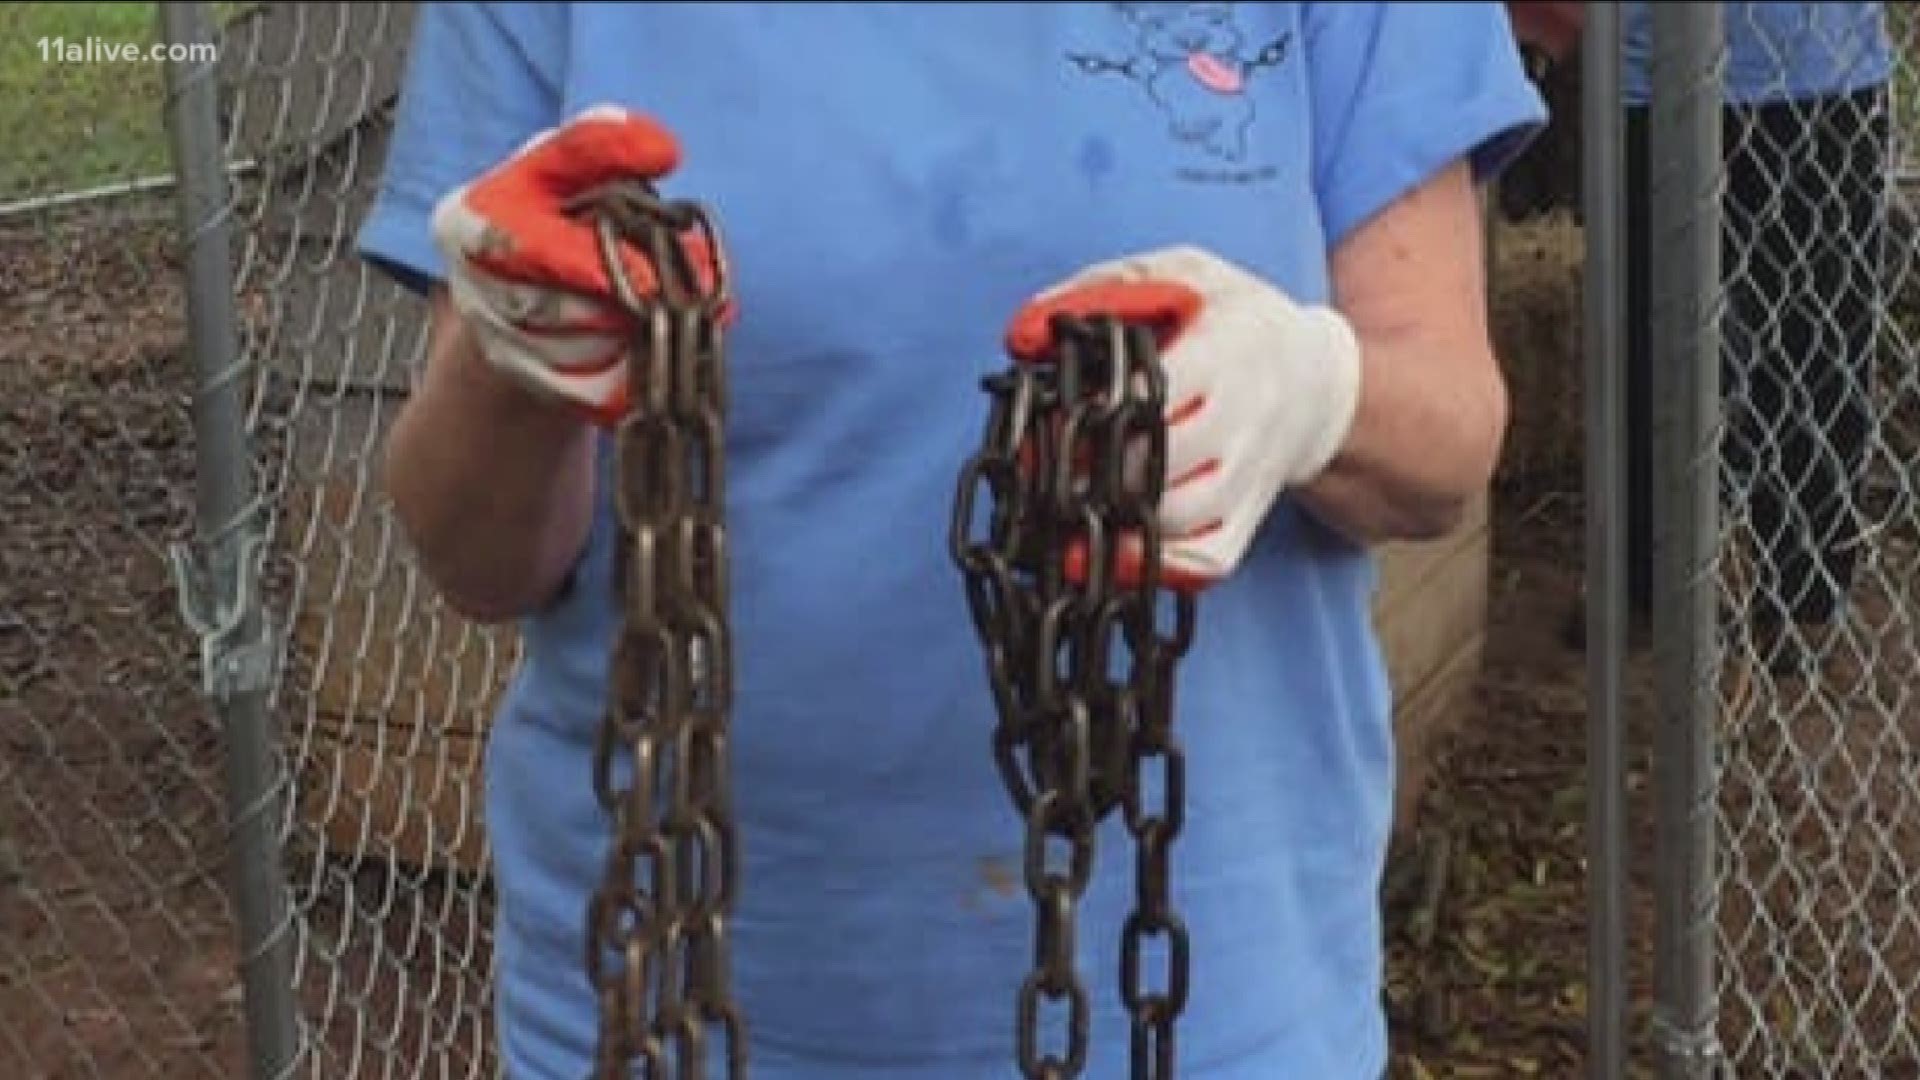 A non-profit in Georgia is trying to free all of the dogs attached to a tether or chain, living outside.